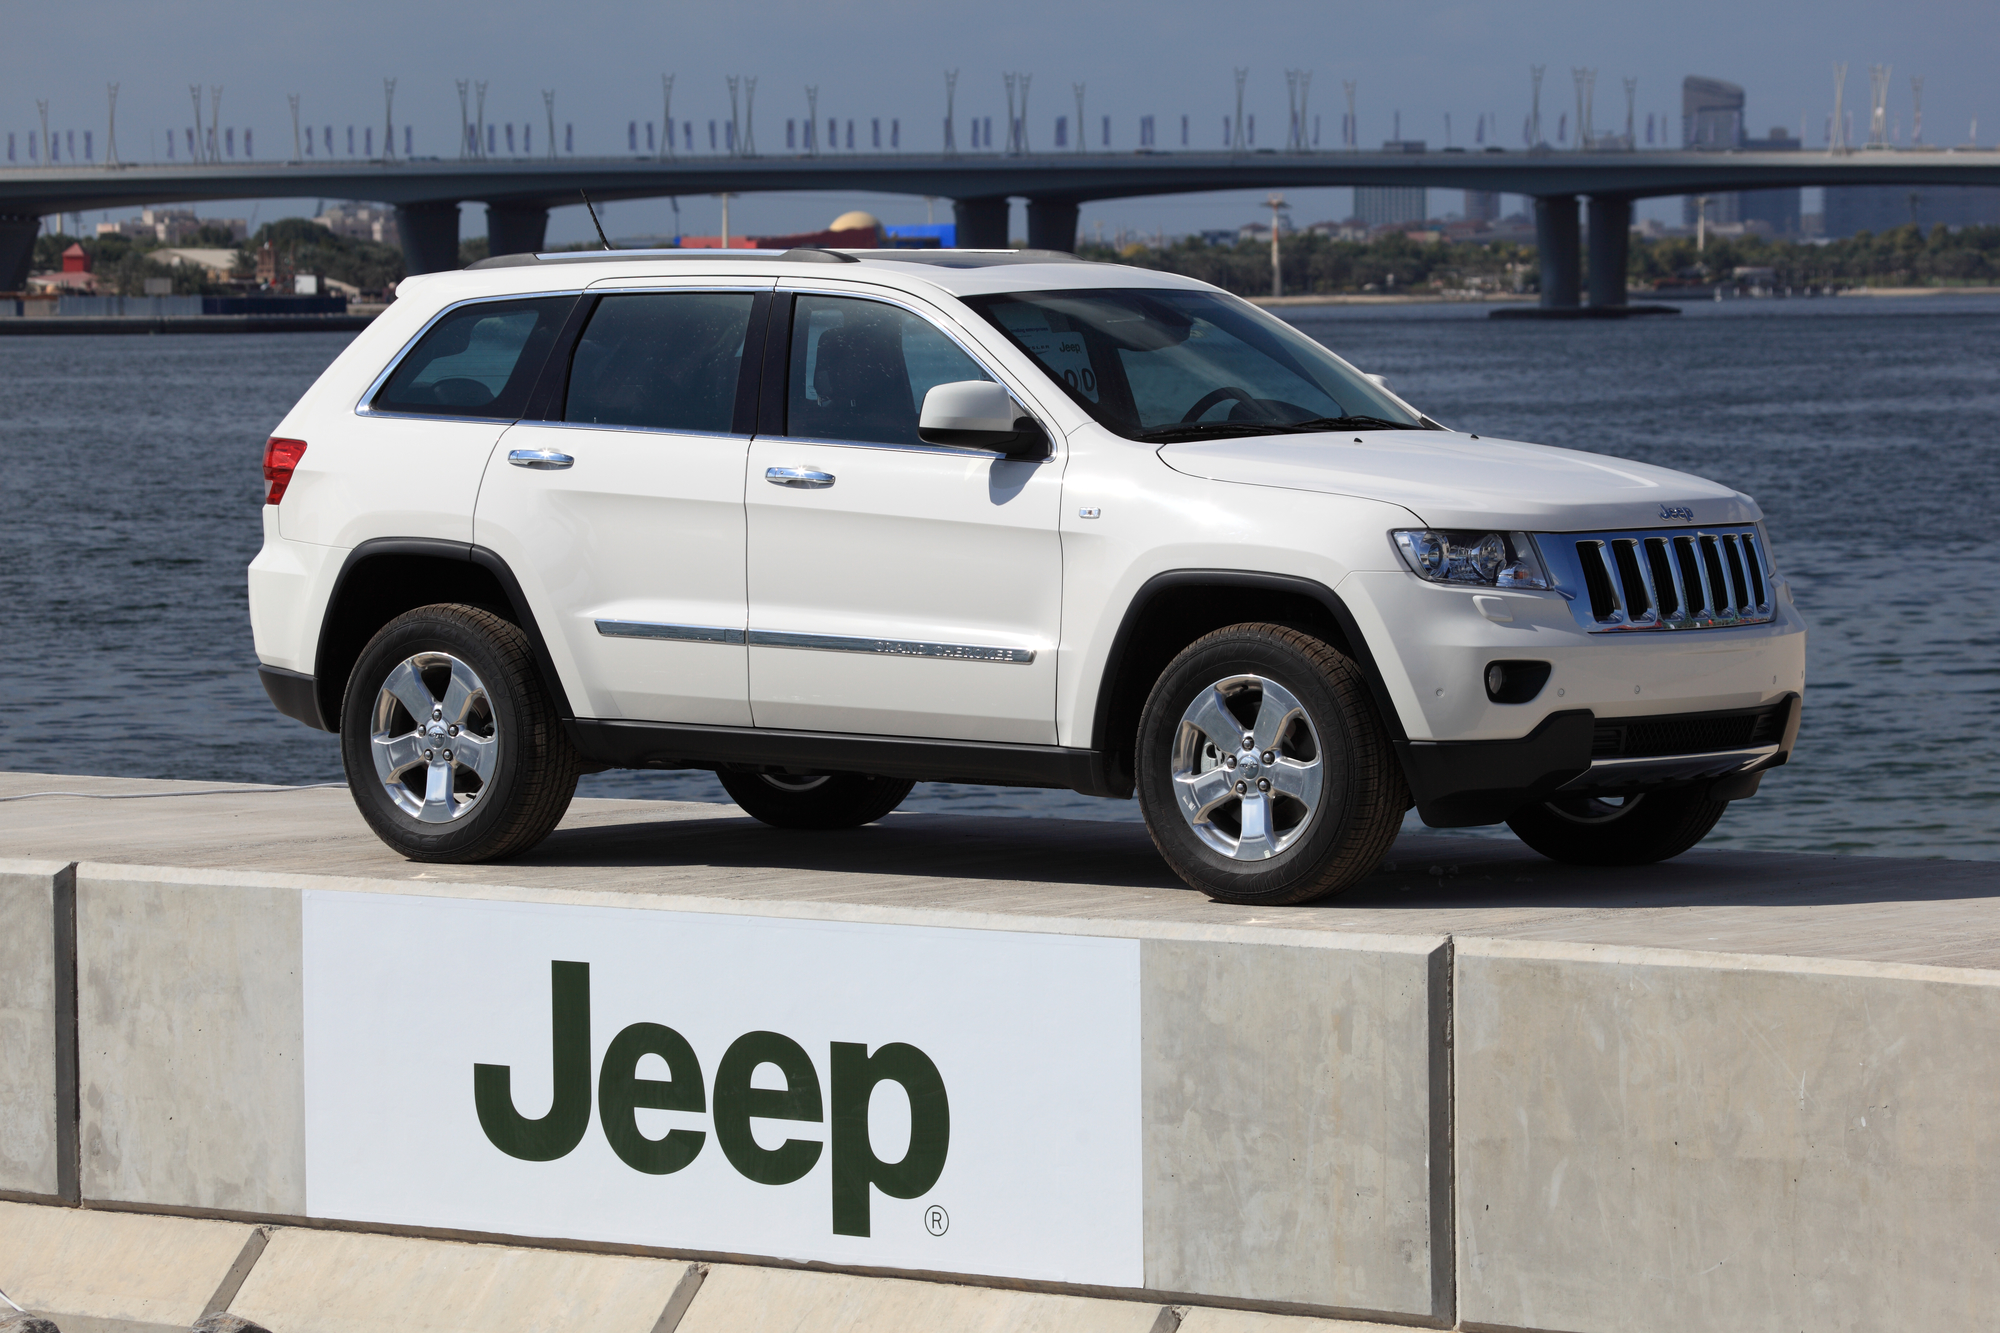 How much does a Jeep Grand Cherokee weigh?